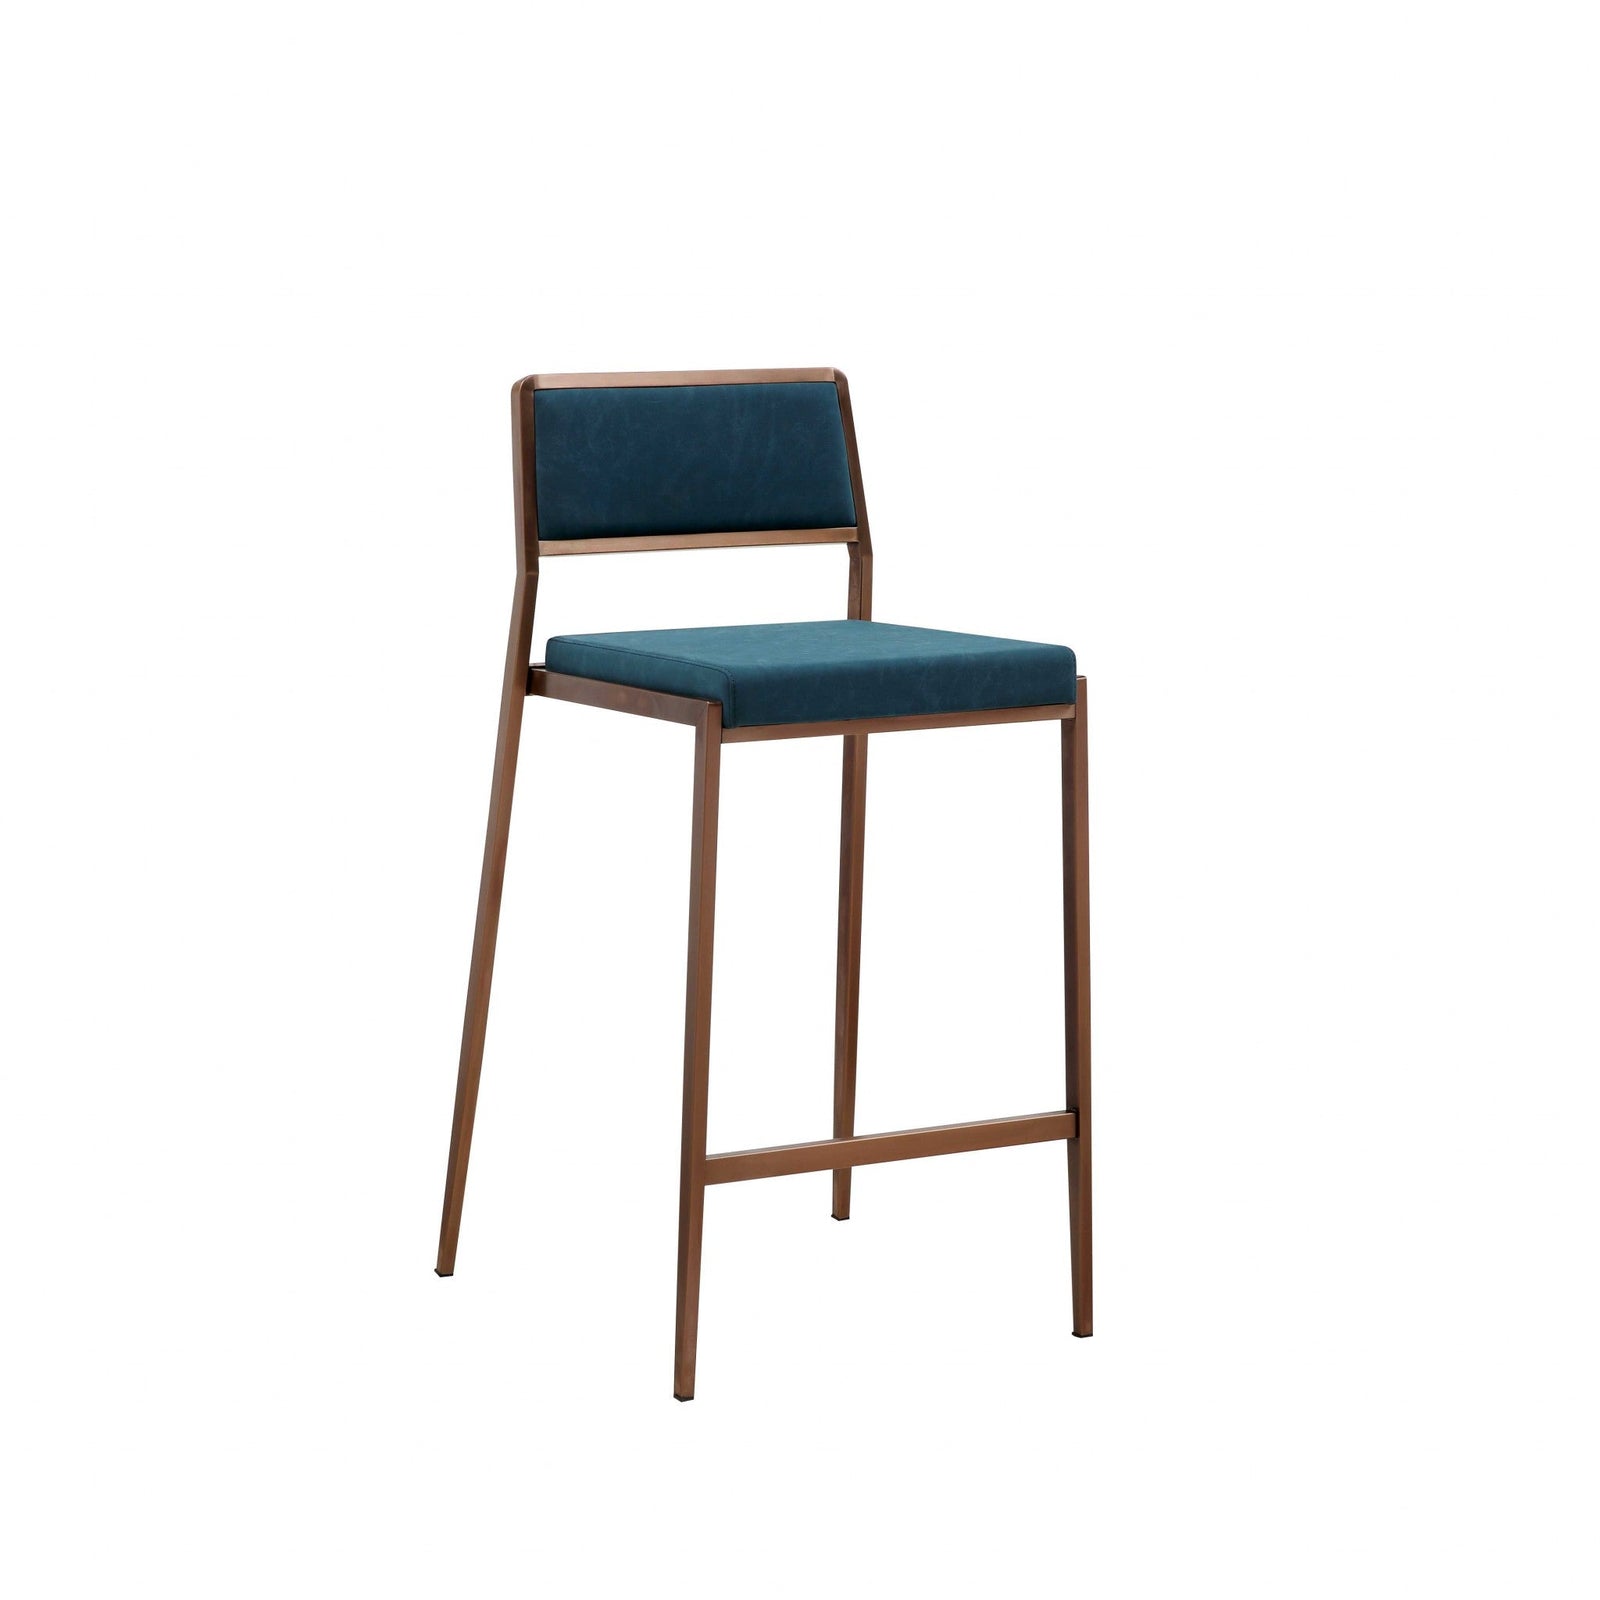 Set of 2 Luxury Teal Blue and Brushed Gold Counter Stools